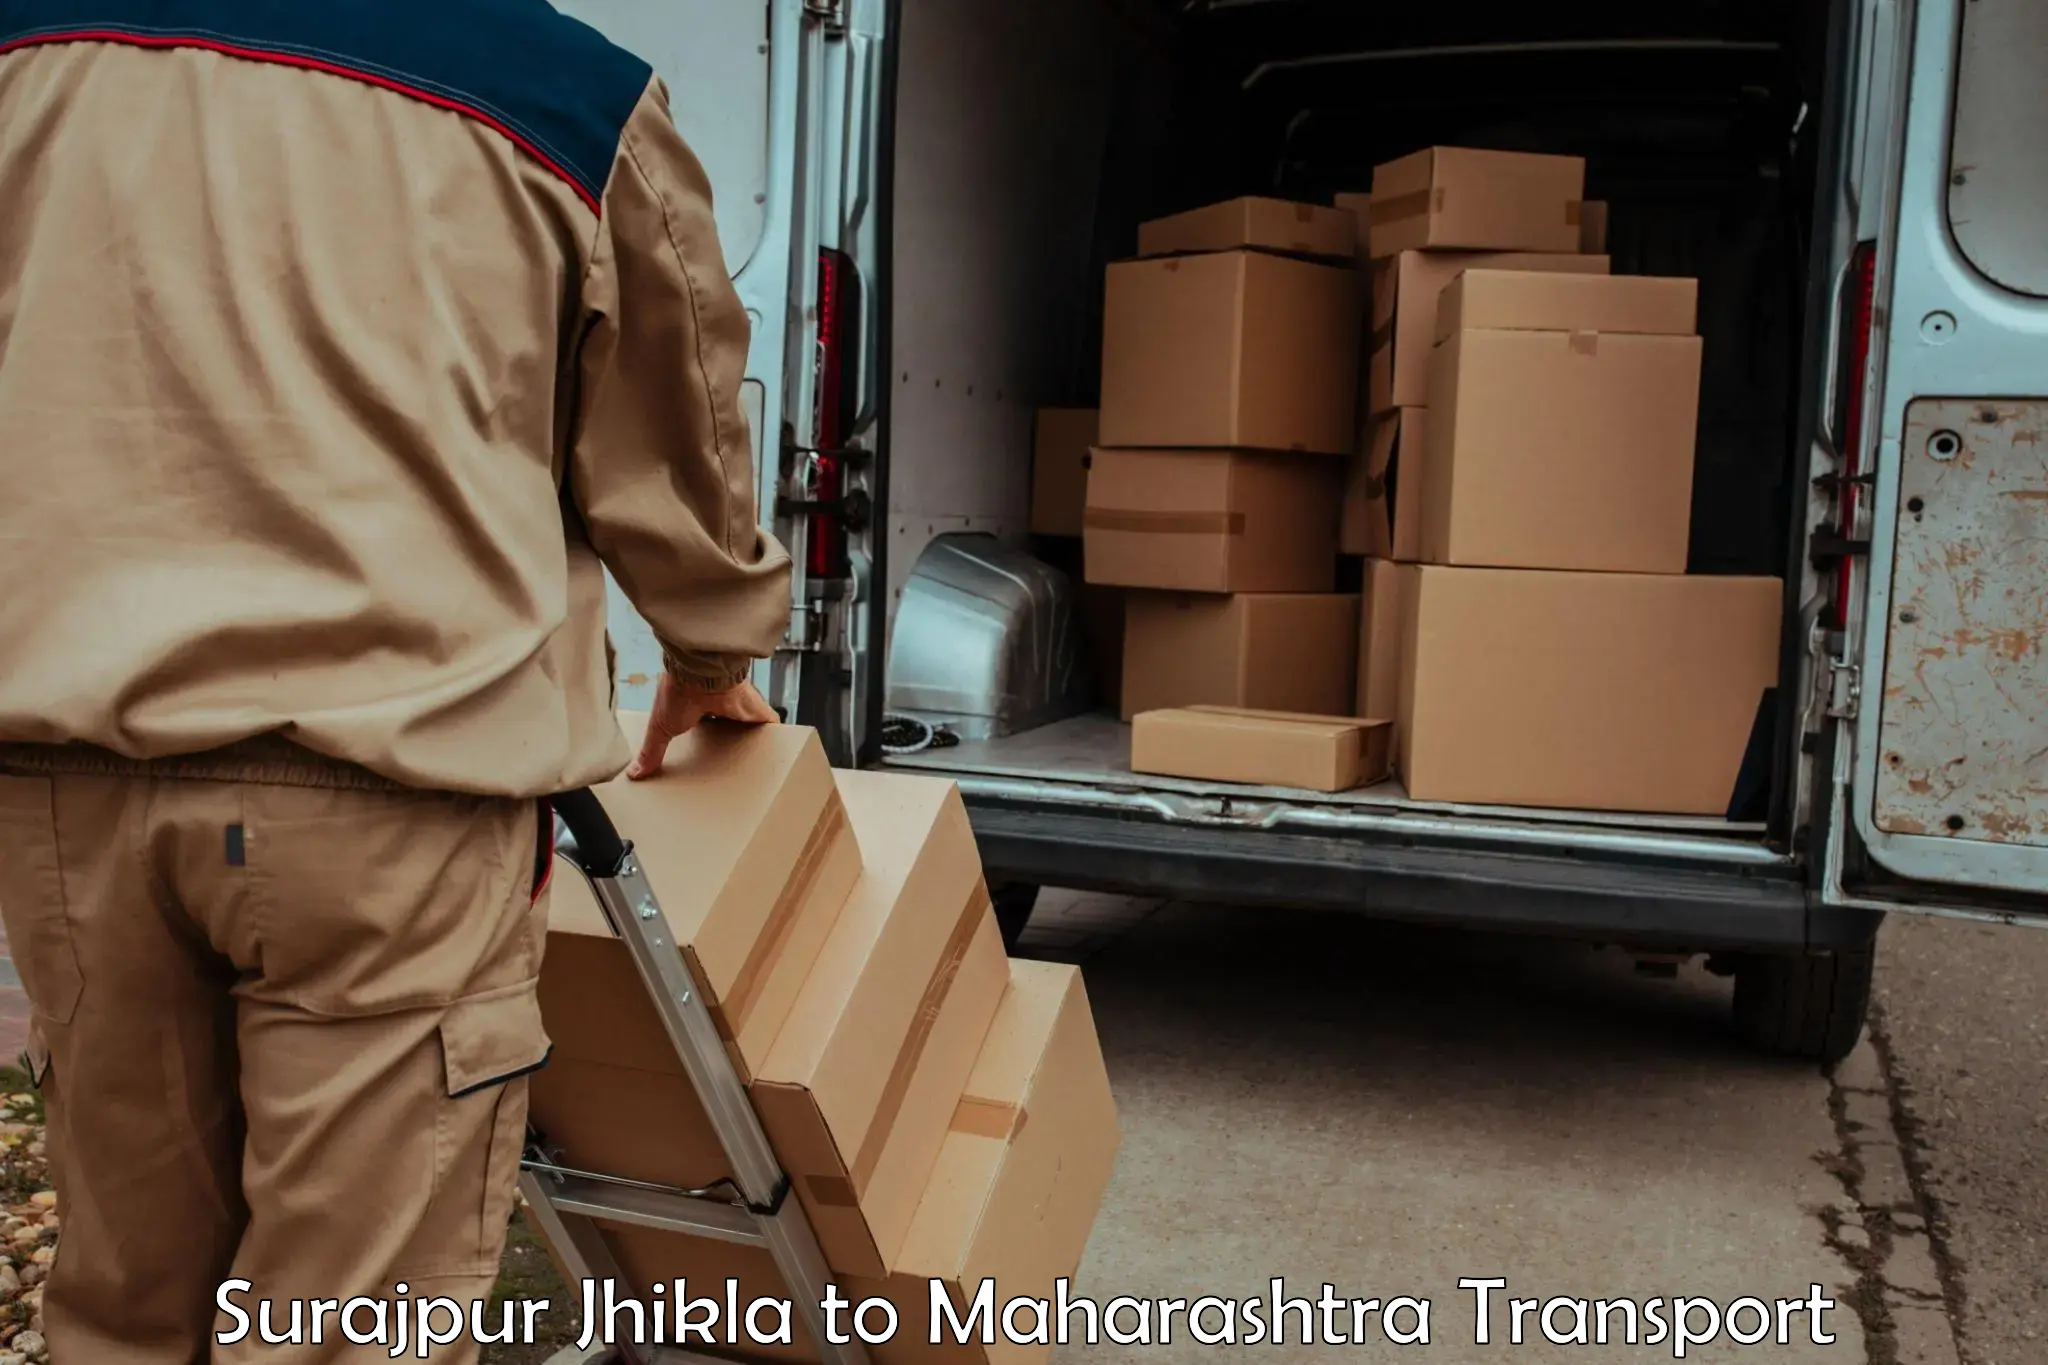 Air freight transport services Surajpur Jhikla to Chalisgaon